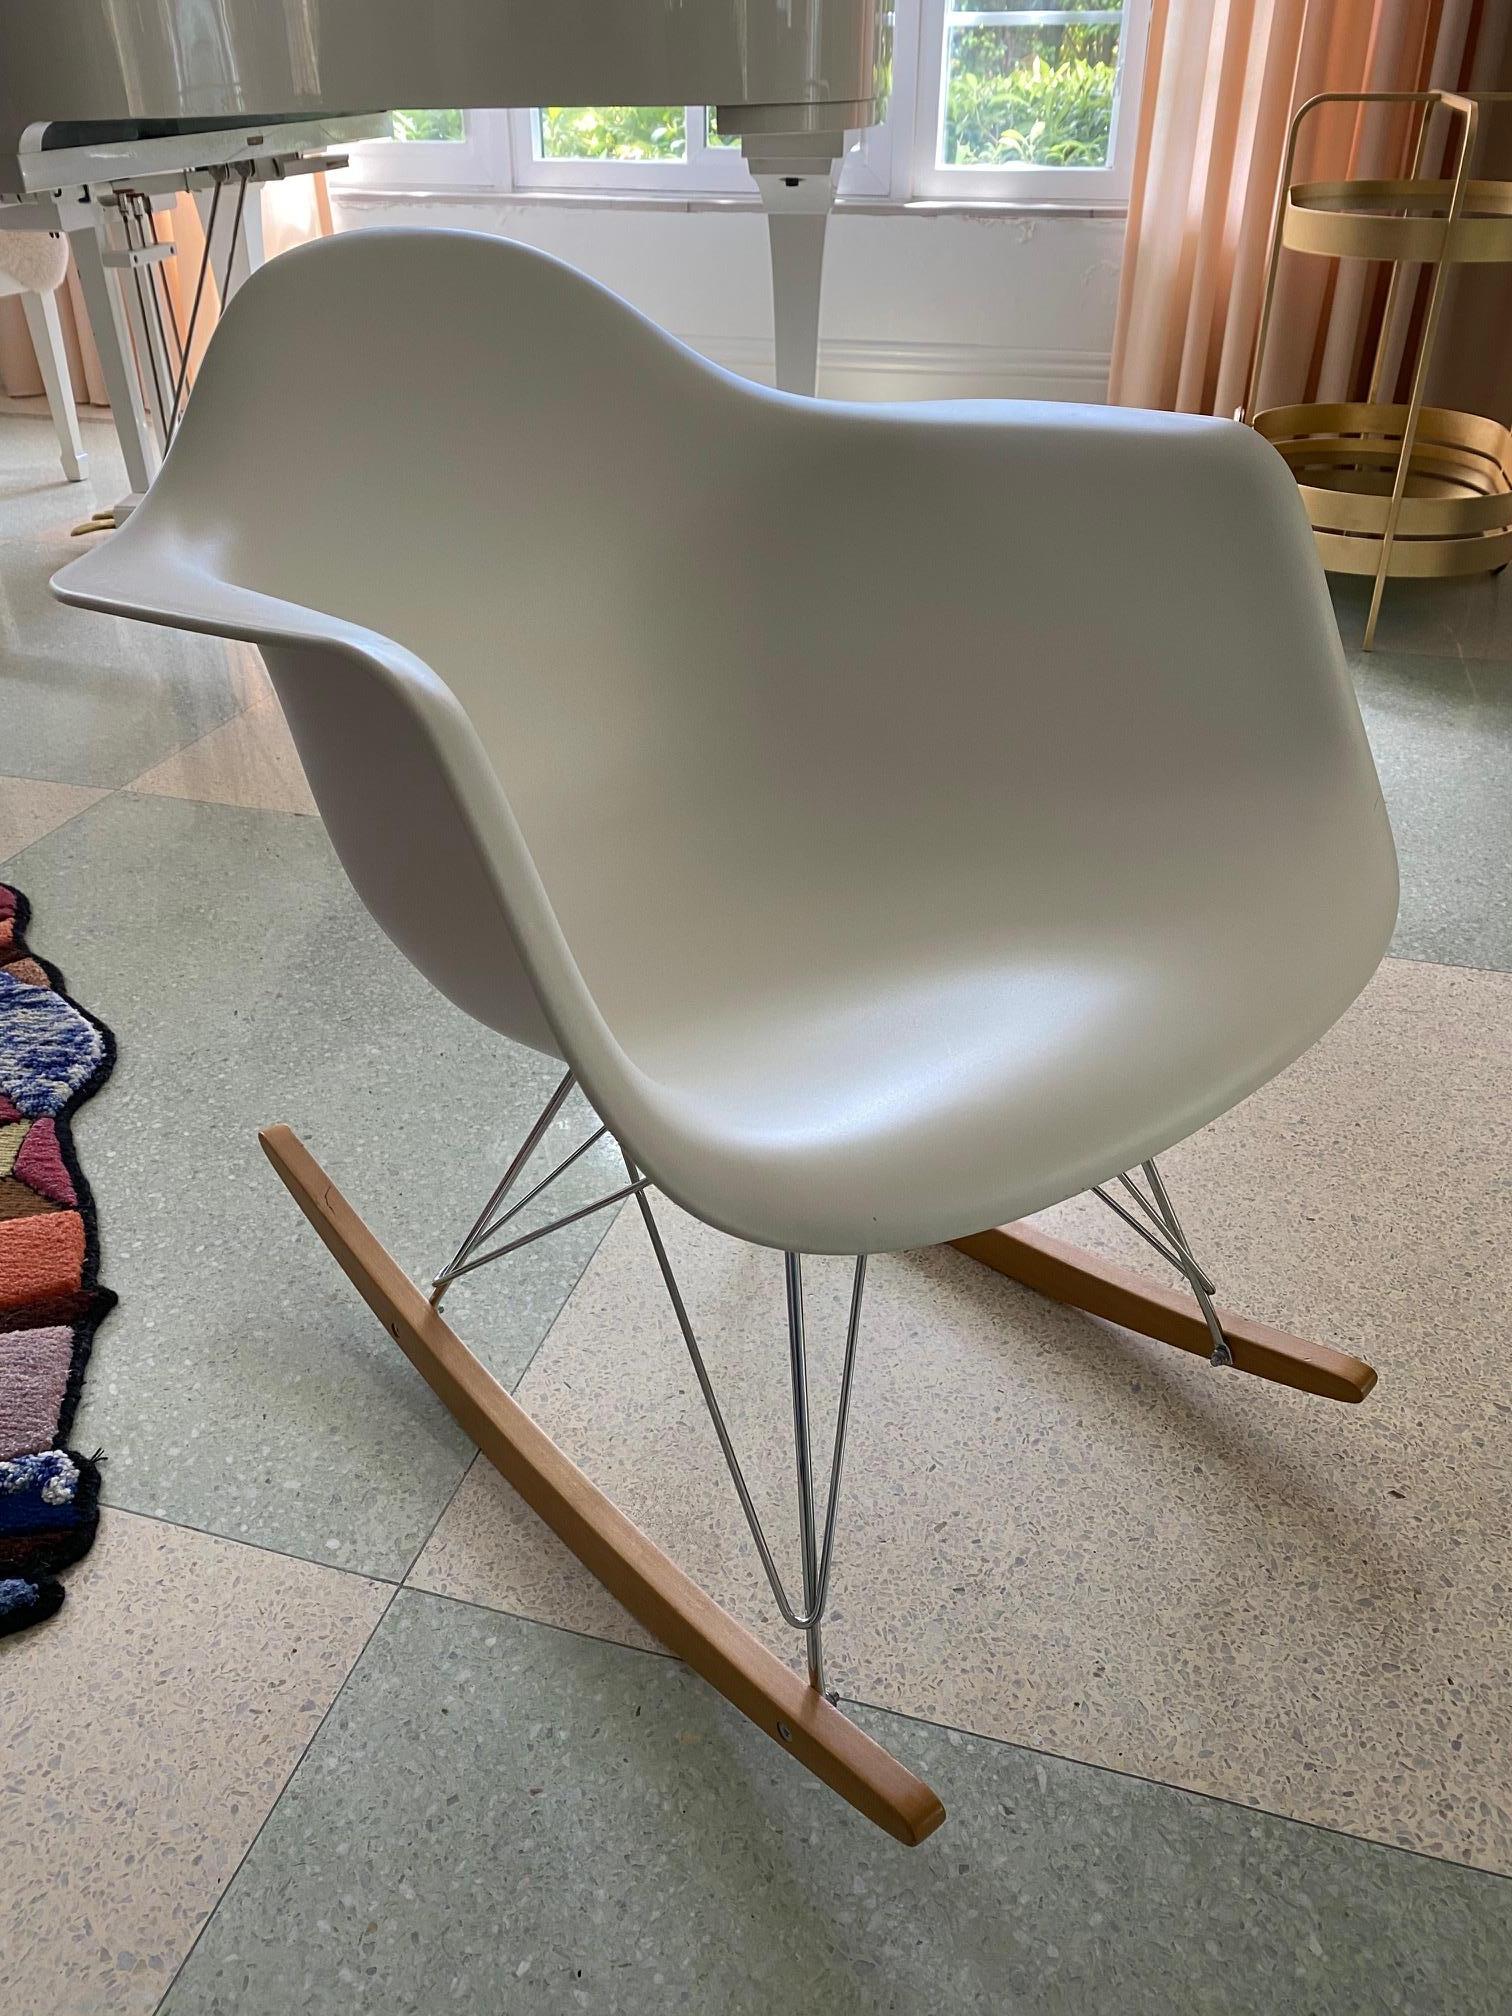 The one-piece shell of this modern rocking chair is molded in 100 percent recyclable polypropylene, which gives it a soft matte finish as light plays across its shadows and contours. The colorful shell is supported by a wire frame and lovely